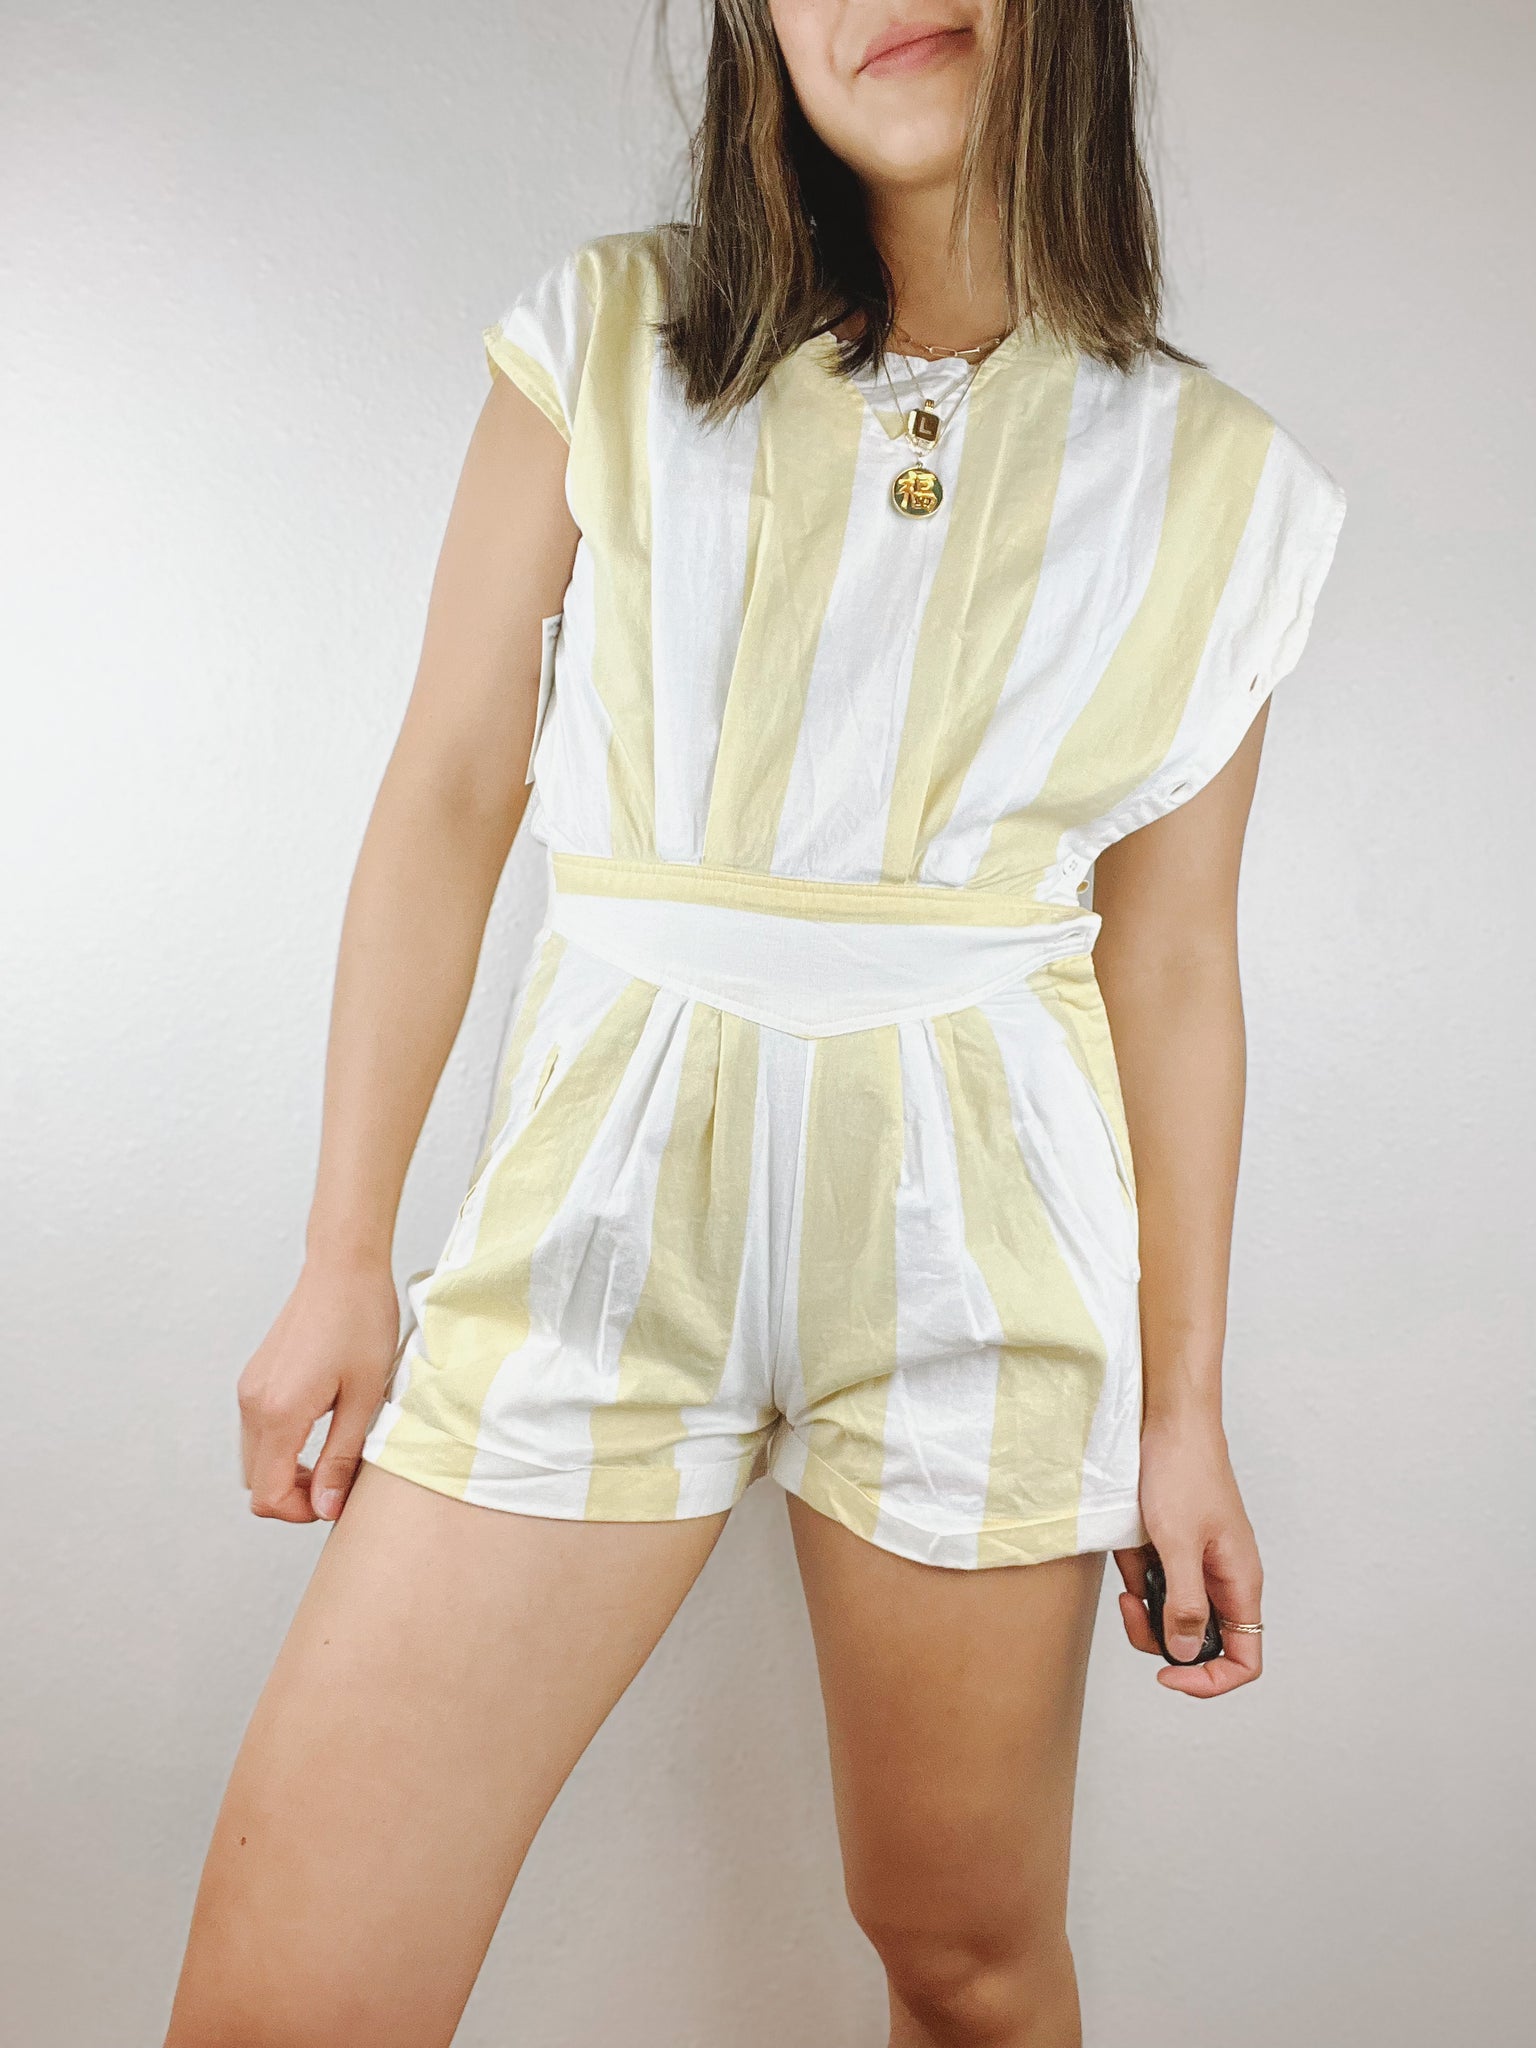 Vintage Yellow and White Striped Romper